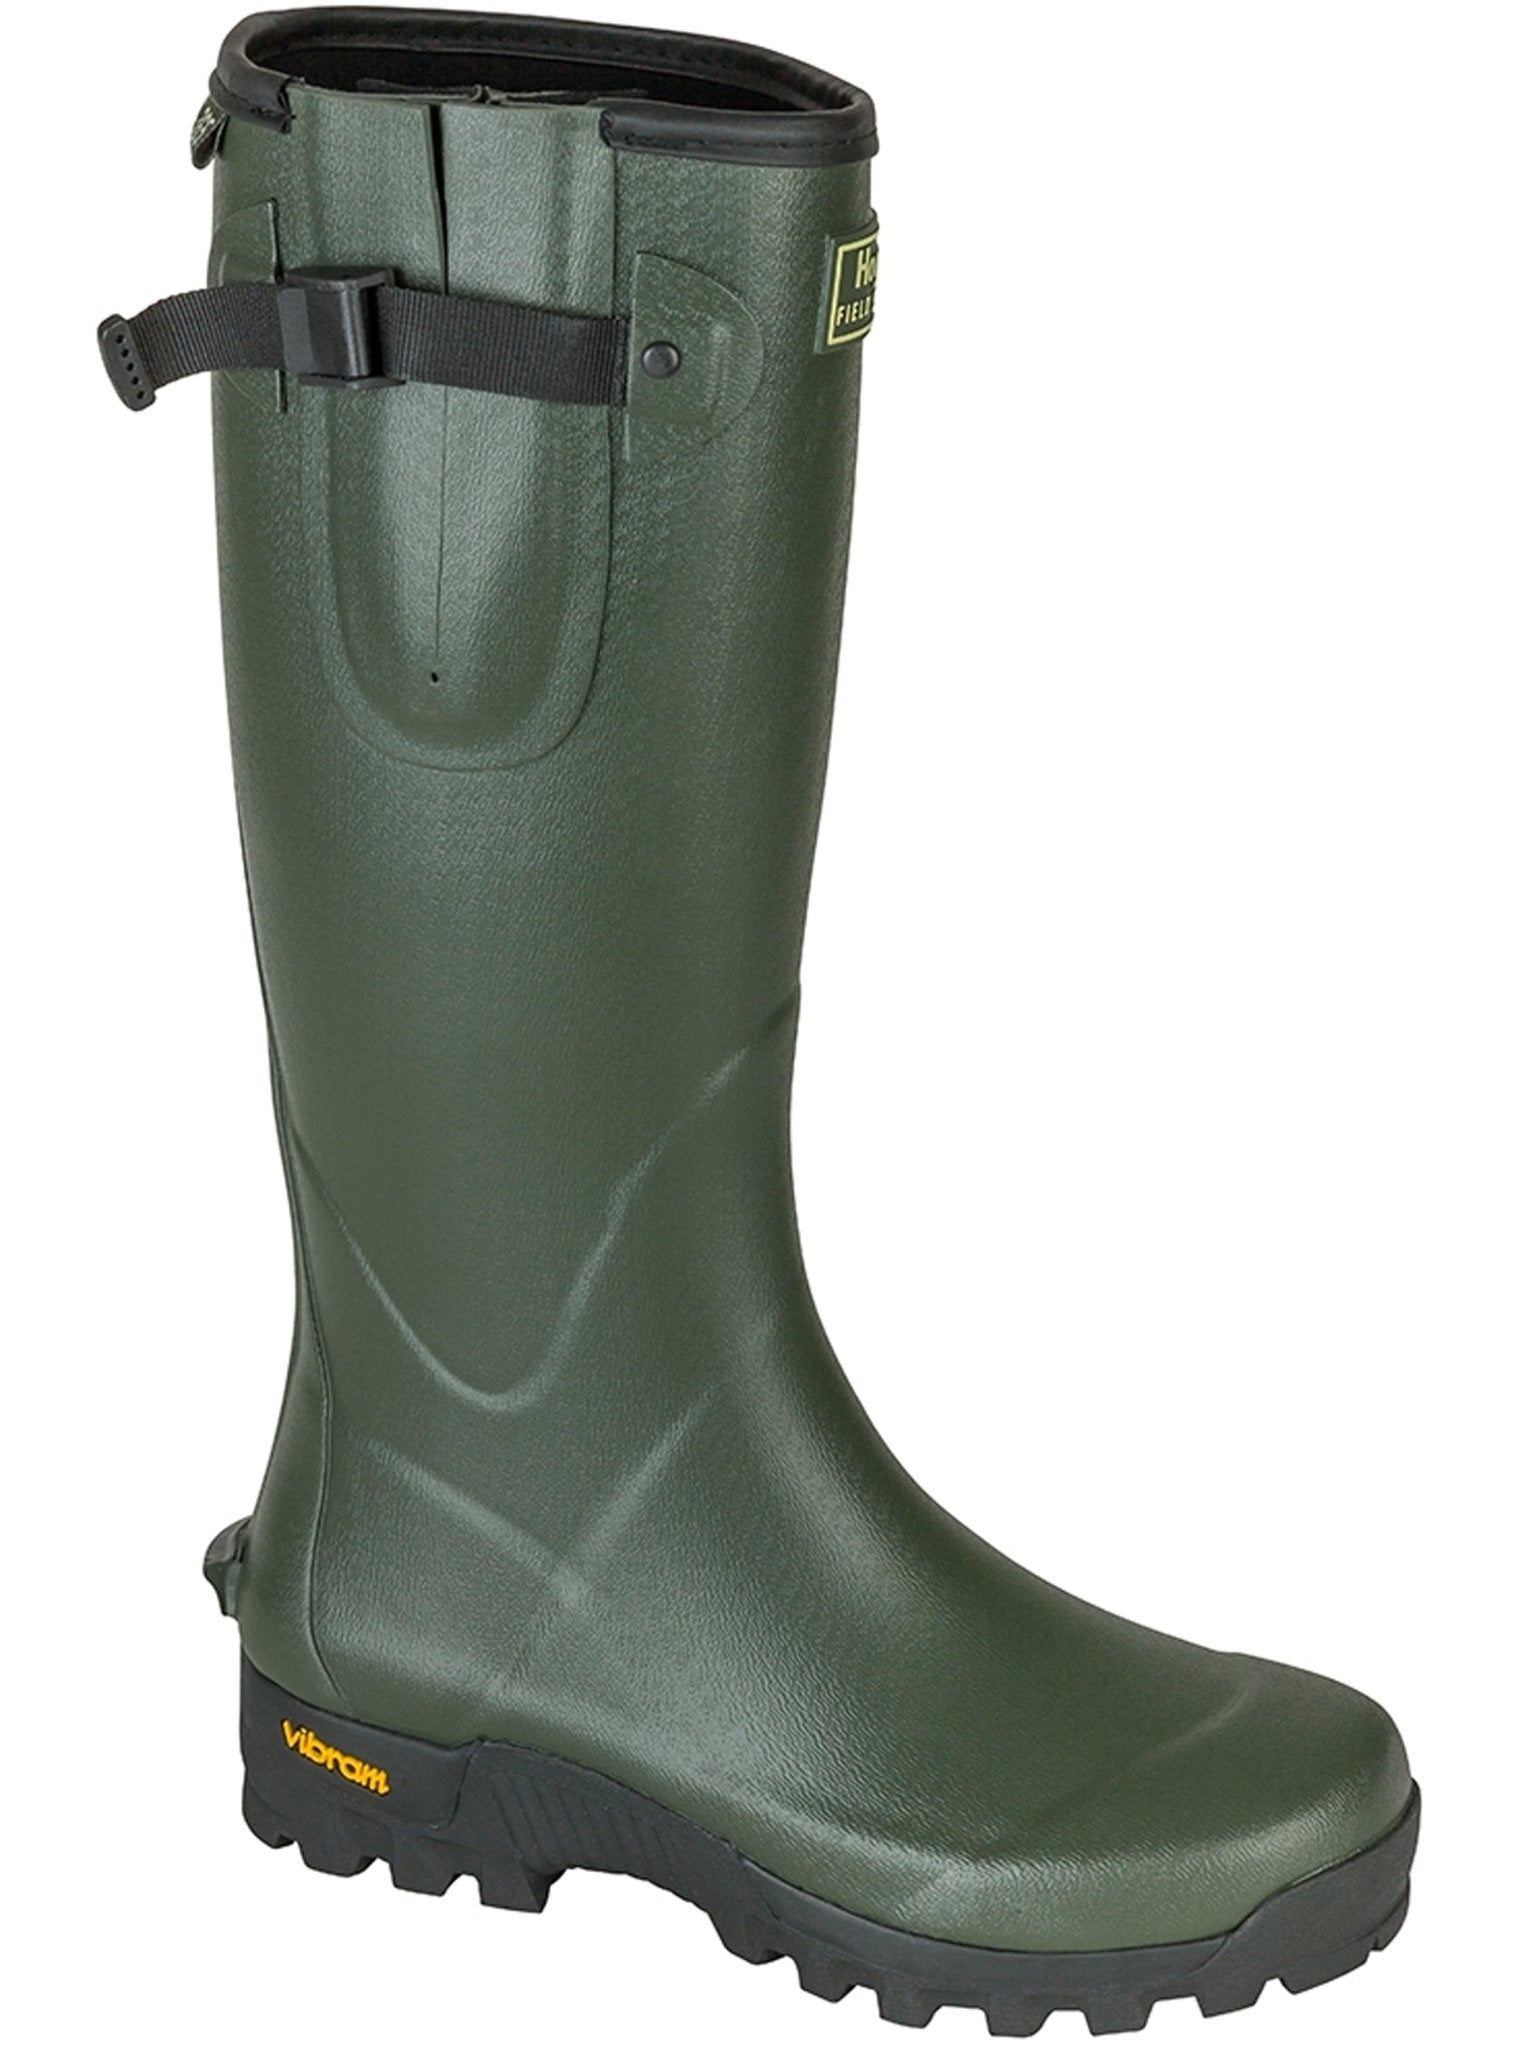 Hoggs of Fife Hoggs Of Fife - Wellington boot Field Sport 365 welly and rain boot Rubber boot Wellington Boots